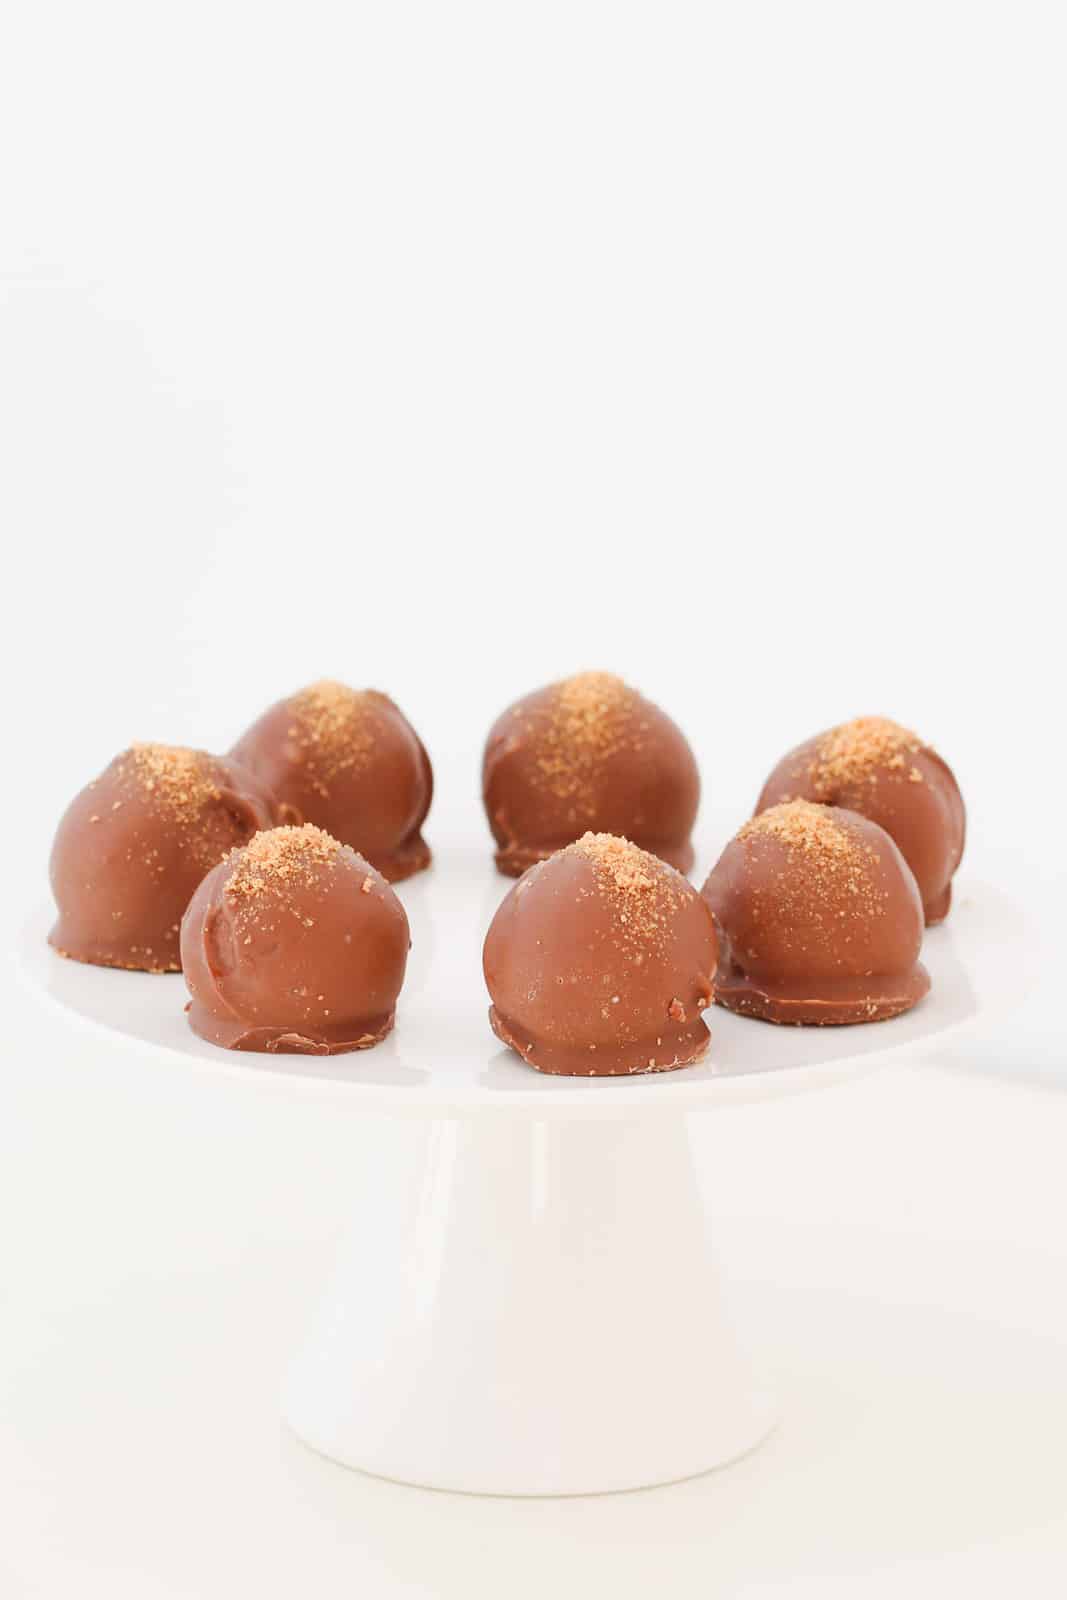 A plate of milk chocolate coated caramel Tim Tam cheesecake balls with gold sugar sprinkled on top.